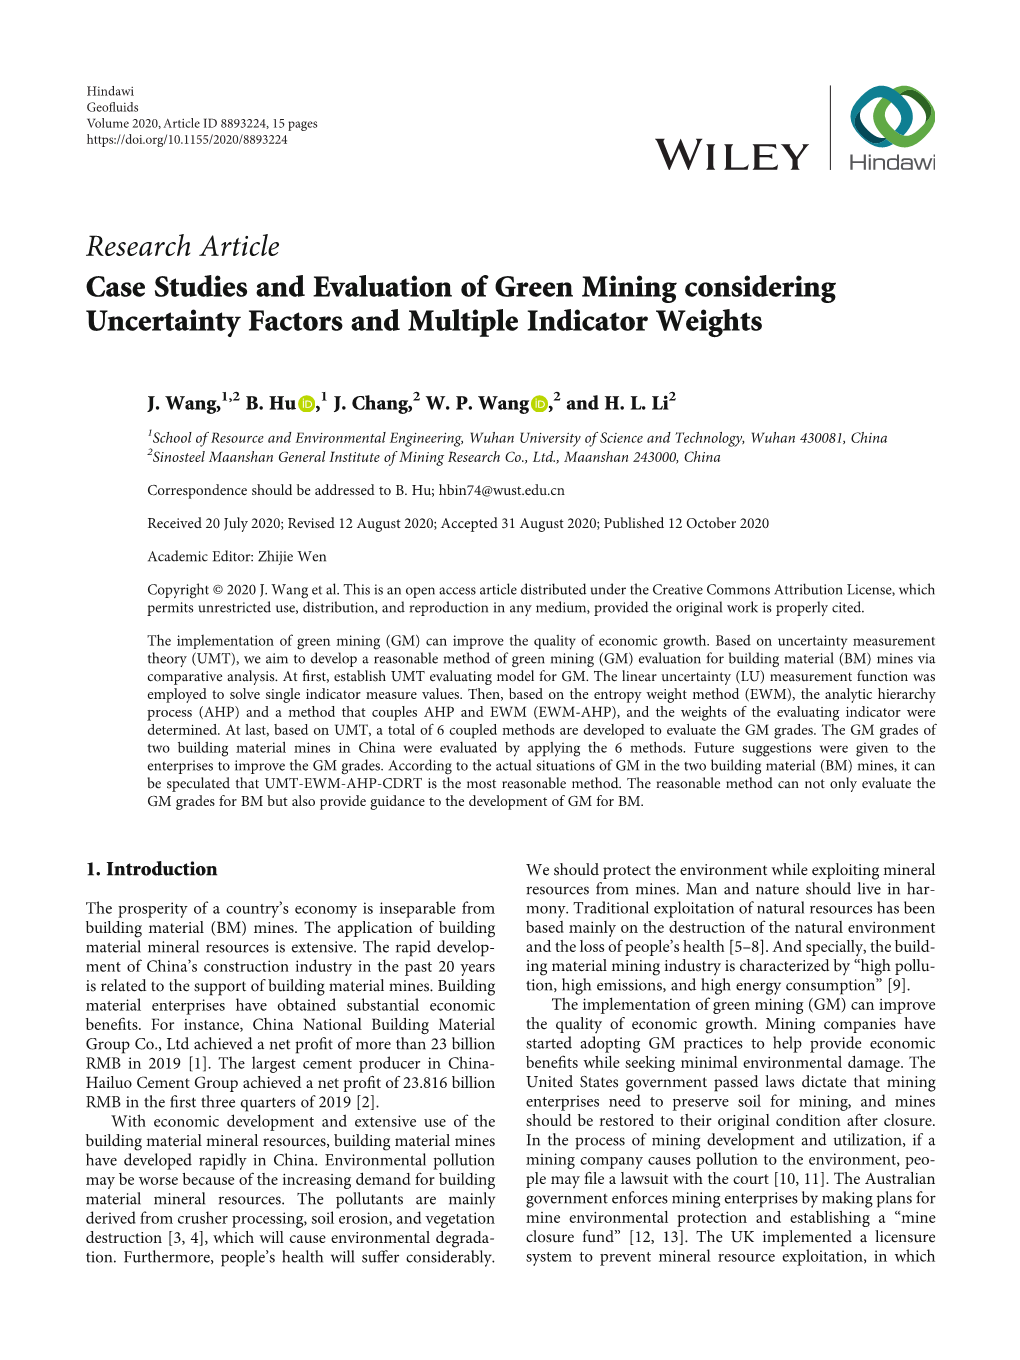 Research Article Case Studies and Evaluation of Green Mining Considering Uncertainty Factors and Multiple Indicator Weights